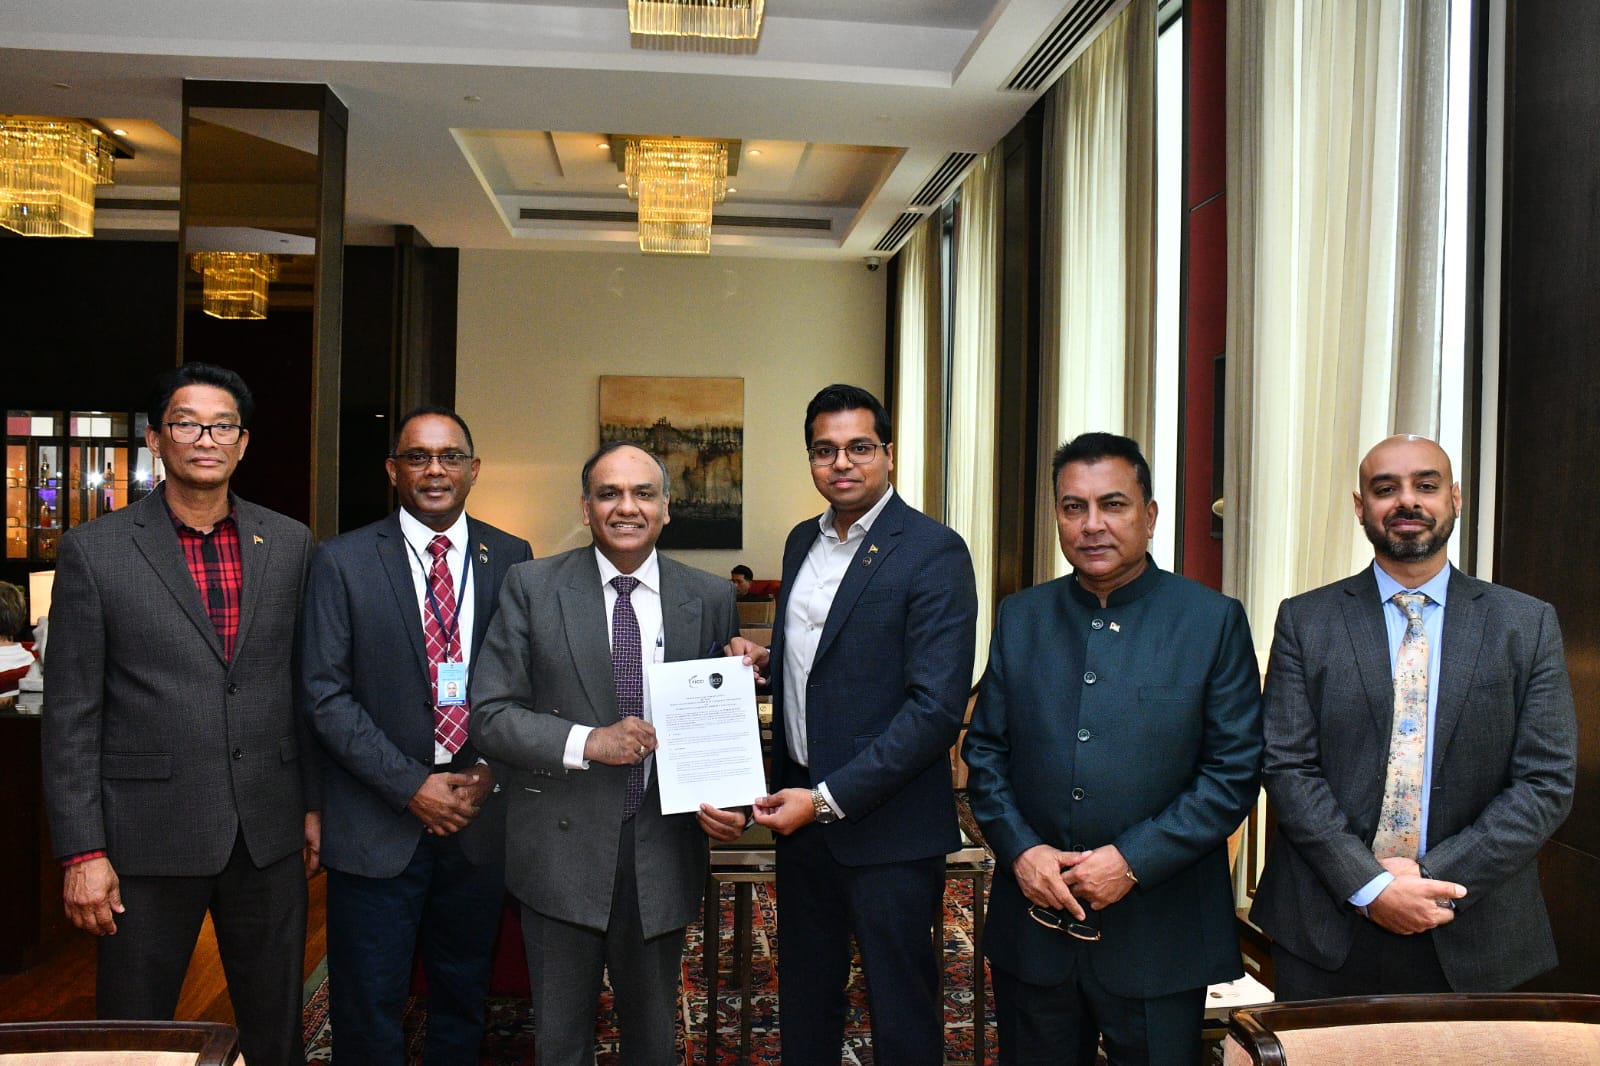 PRESS RELEASE: GCCI signs a Memorandum of Understanding with FICCI, the Federation of Indian Chambers of Commerce and Industry